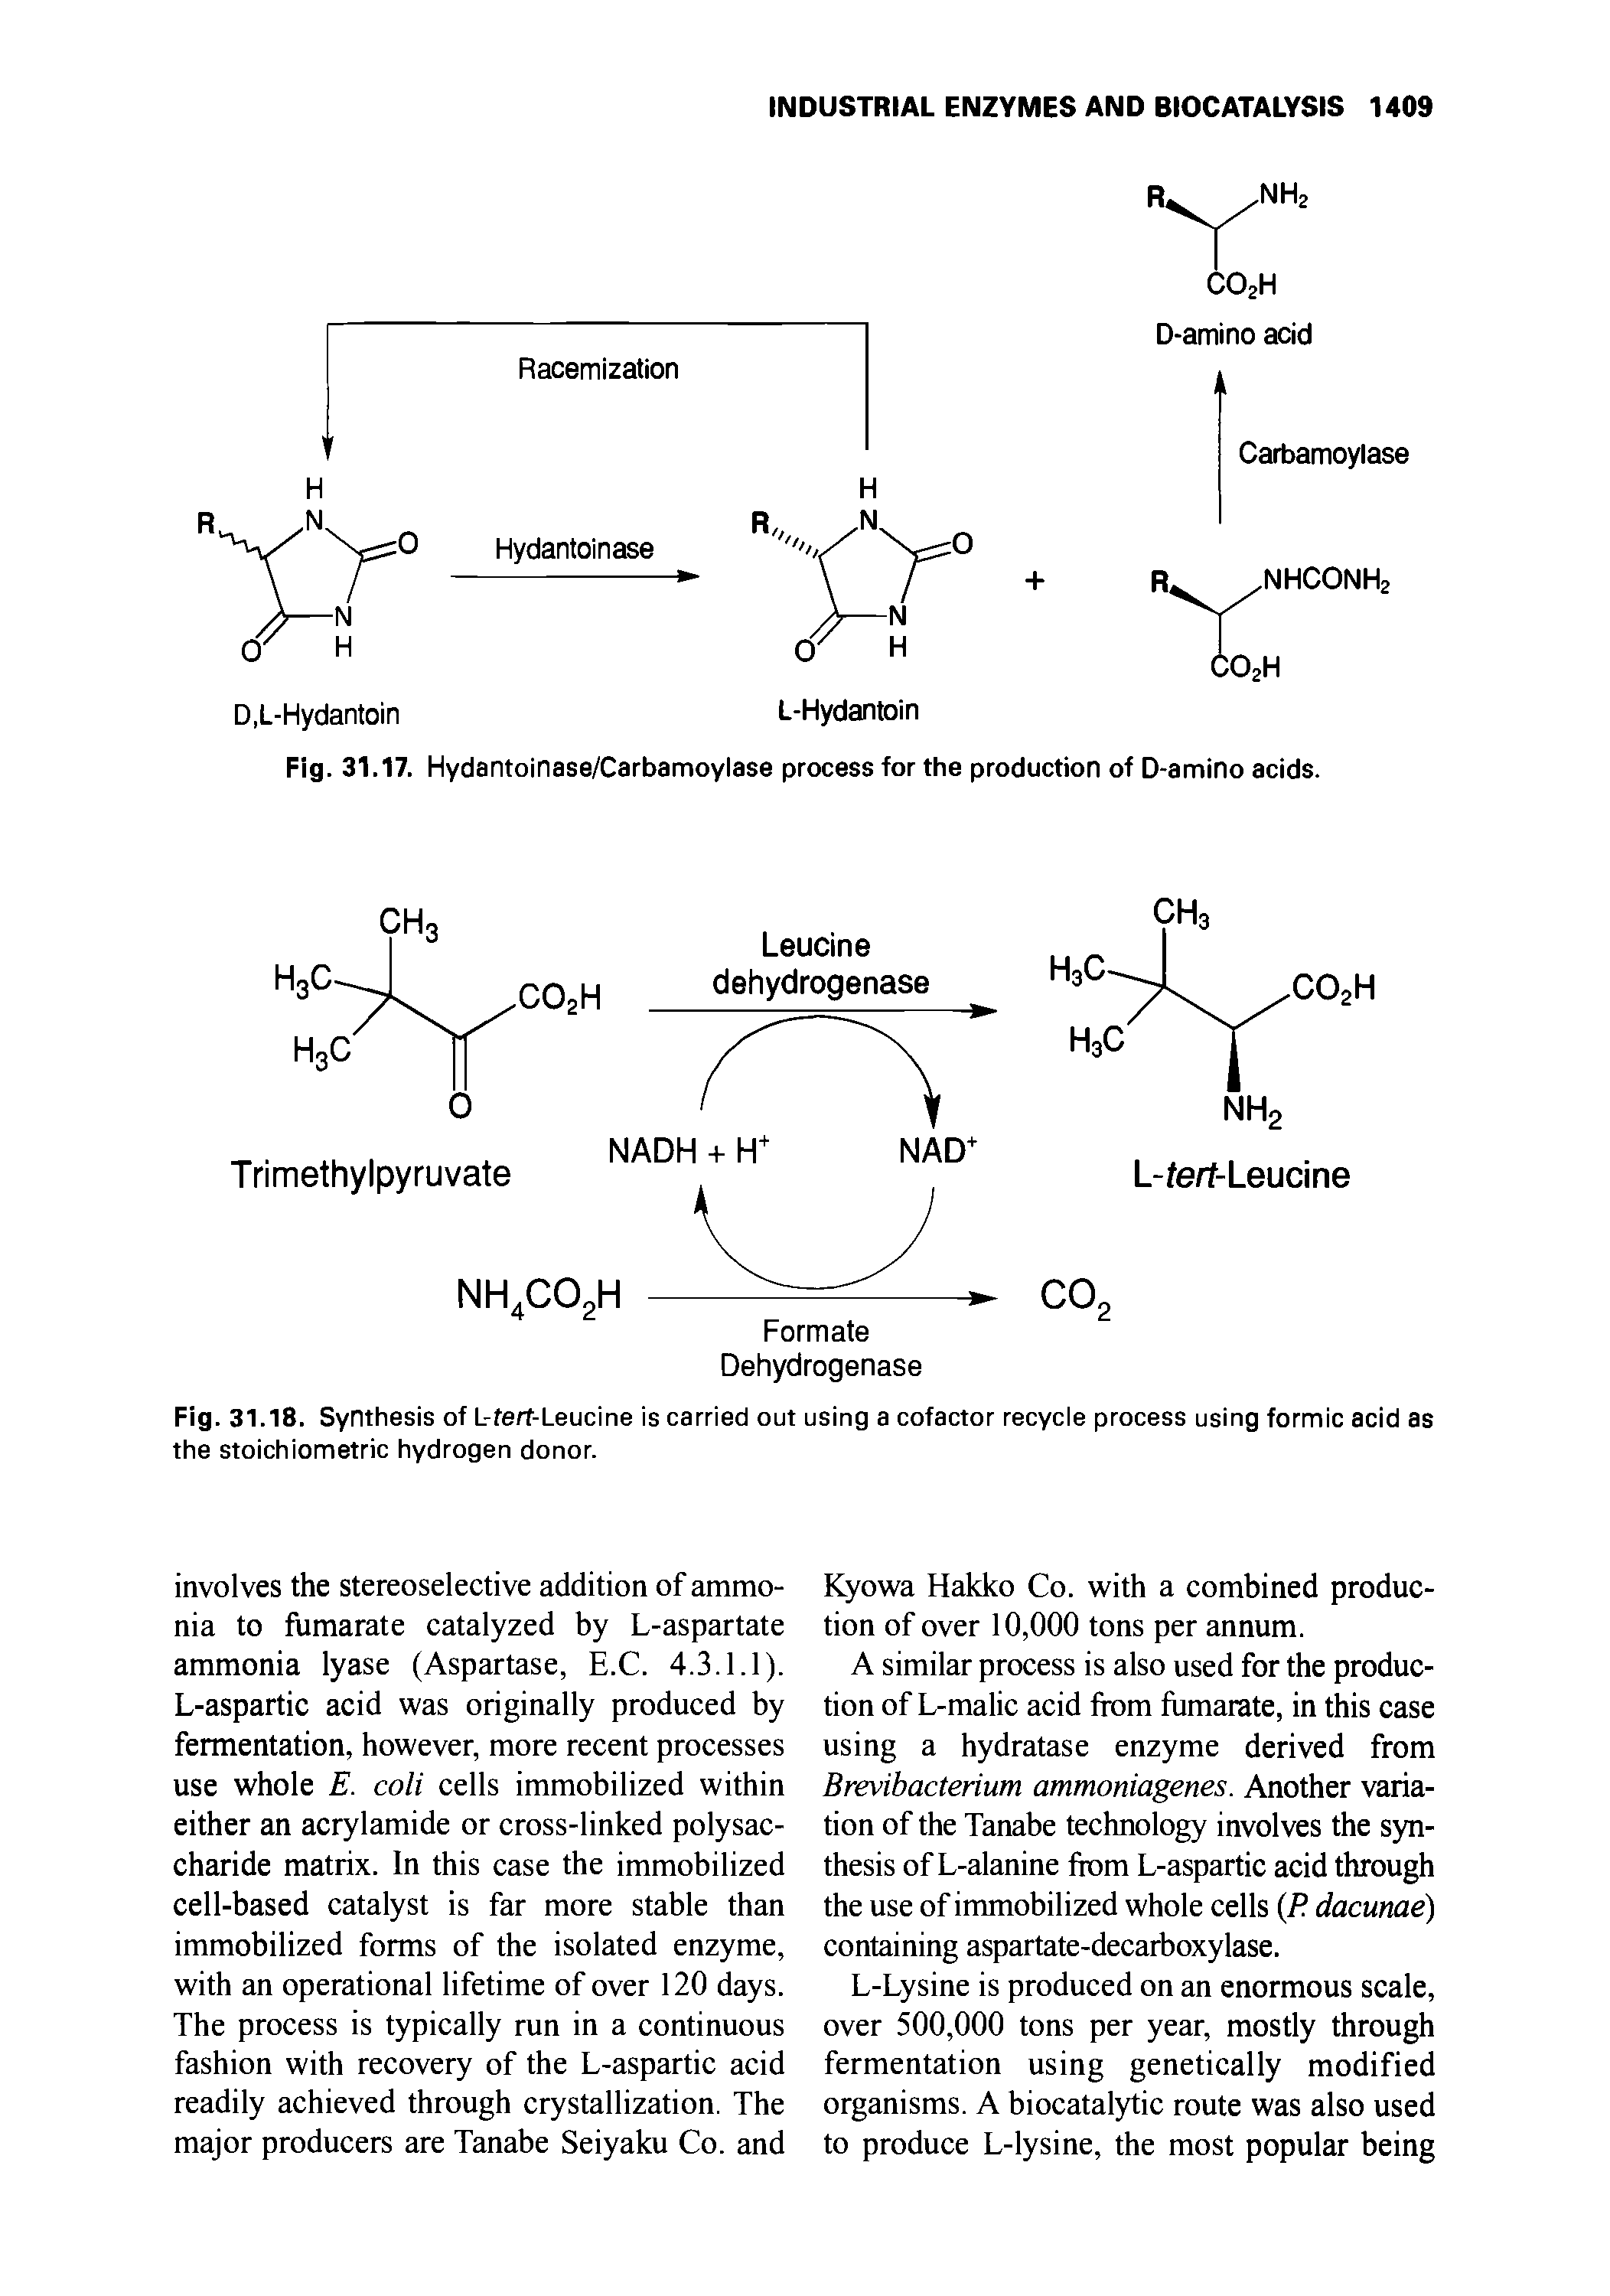 Fig. 31.17. Hydantoinase/Carbamoylase process for the production of D-amino acids.